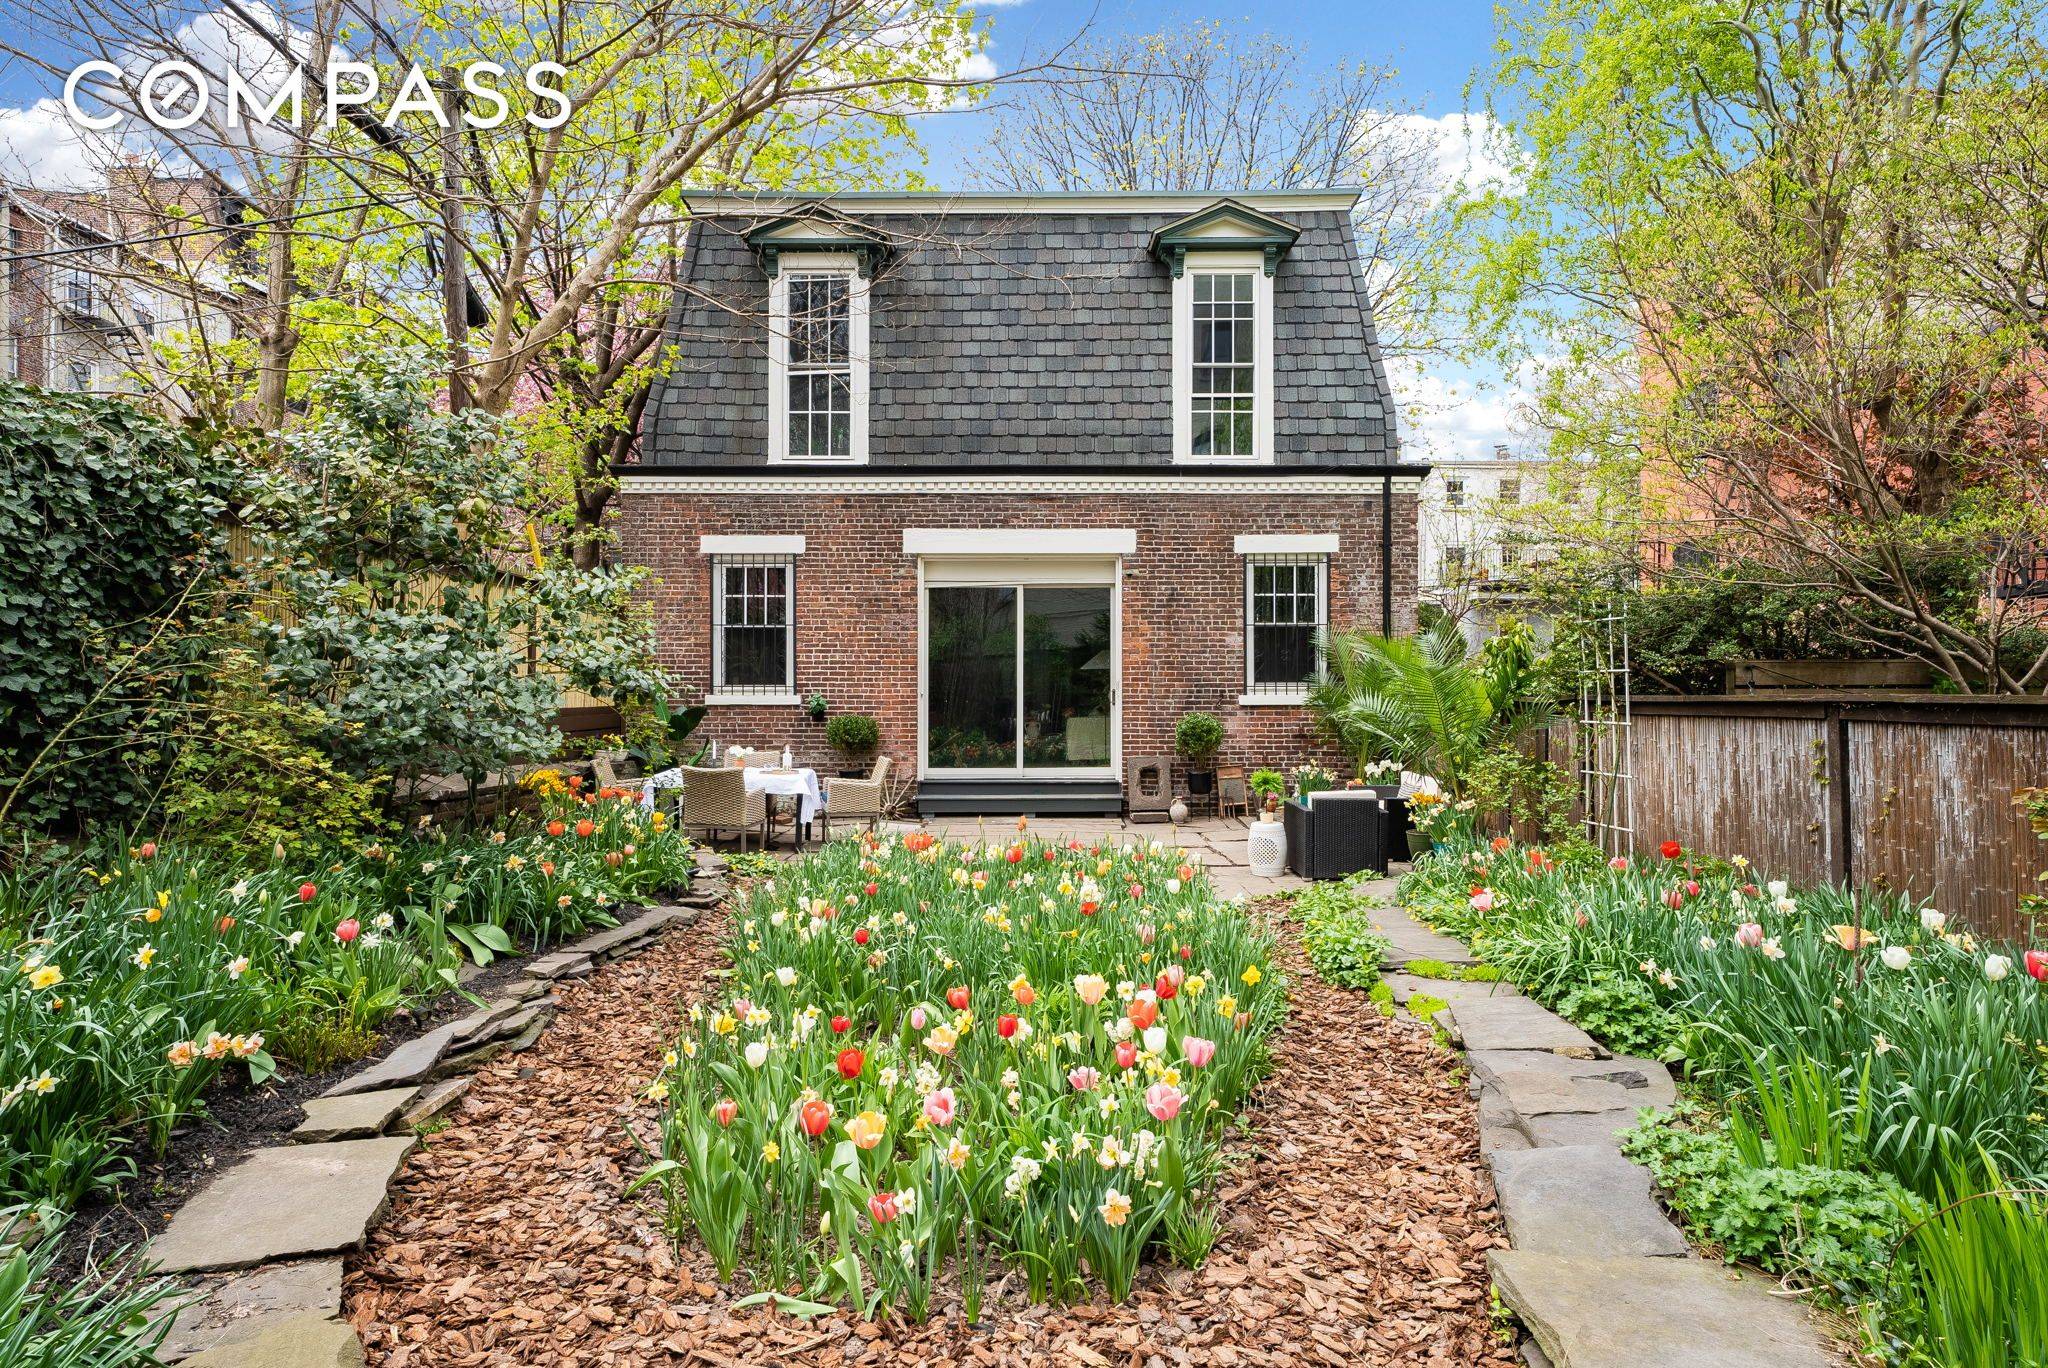 Seize this once in a generation opportunity to own a magnificent secluded, free standing 1870 s built double mansard carriage house with a massive garden tucked down a 5 car ...